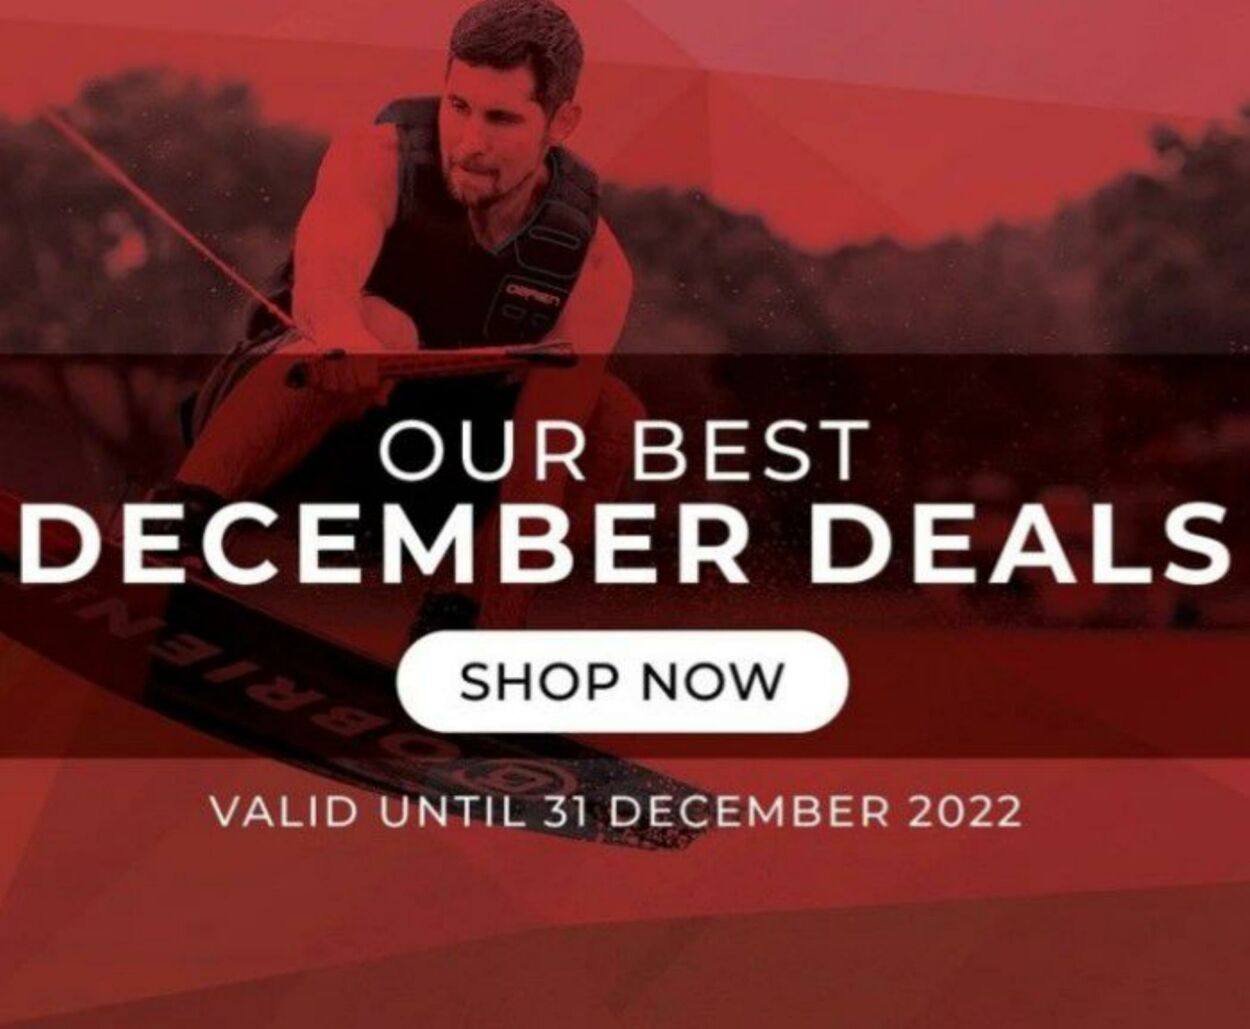 Special Sportsmans Warehouse 12.12.2022-26.12.2022